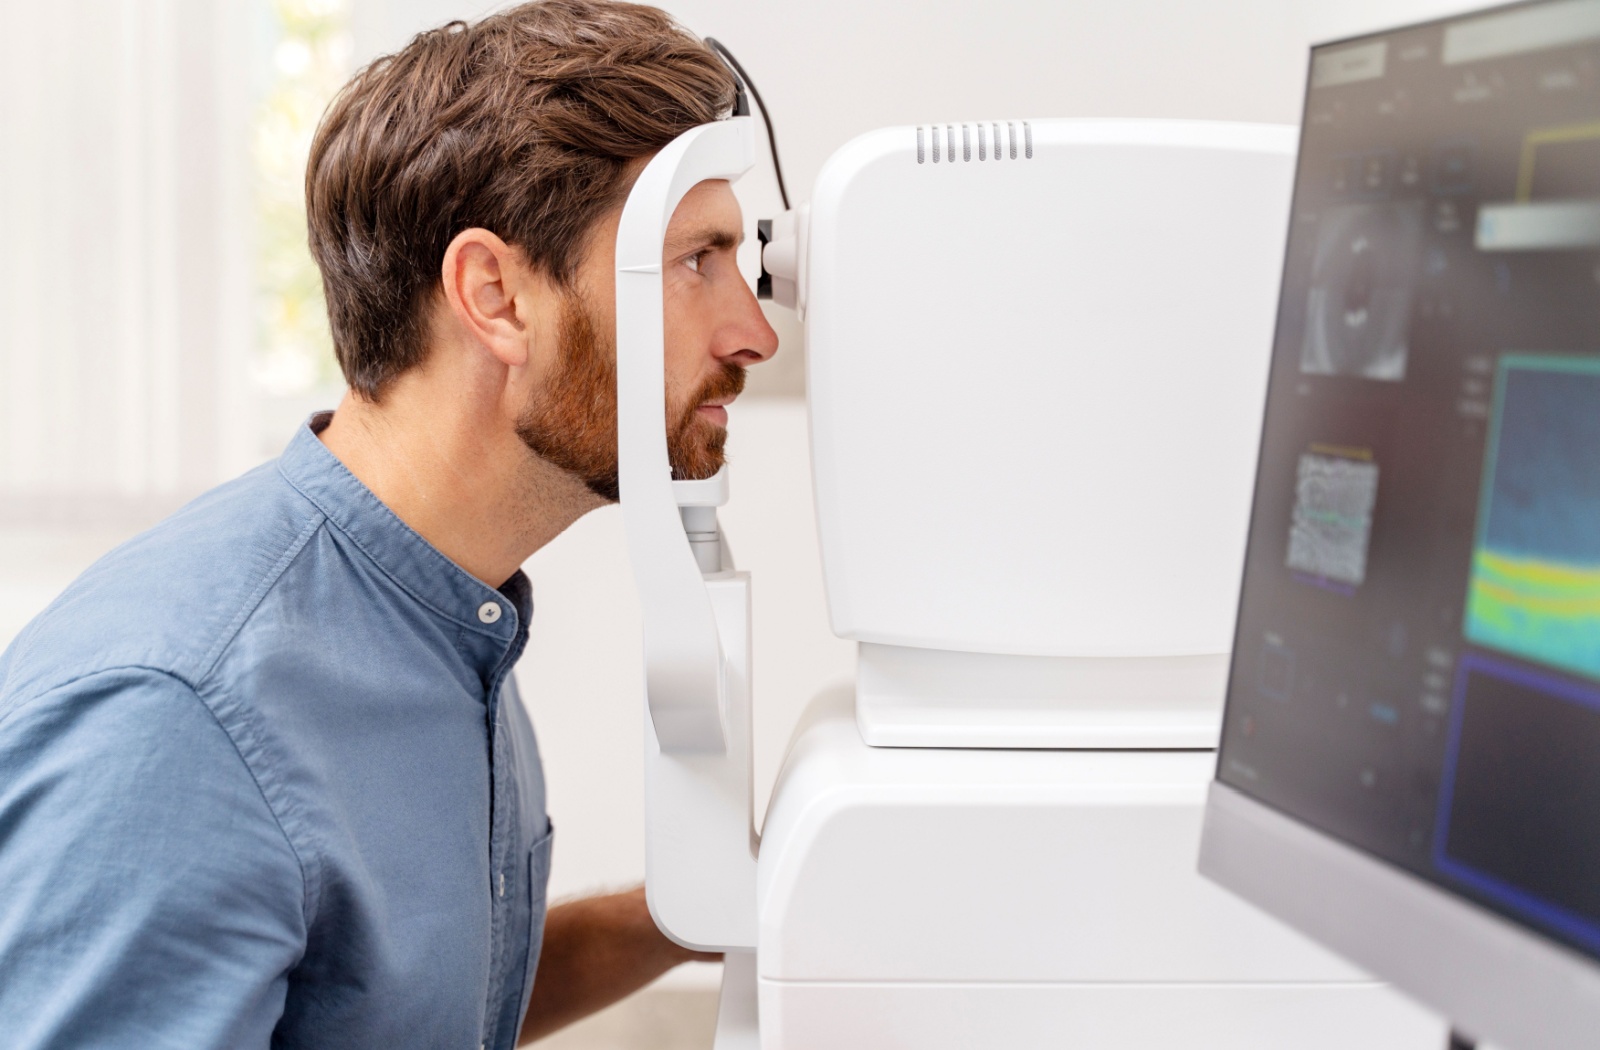 A man sitting with his face resting on the retinal imaging device with his left eye looking into the camera.